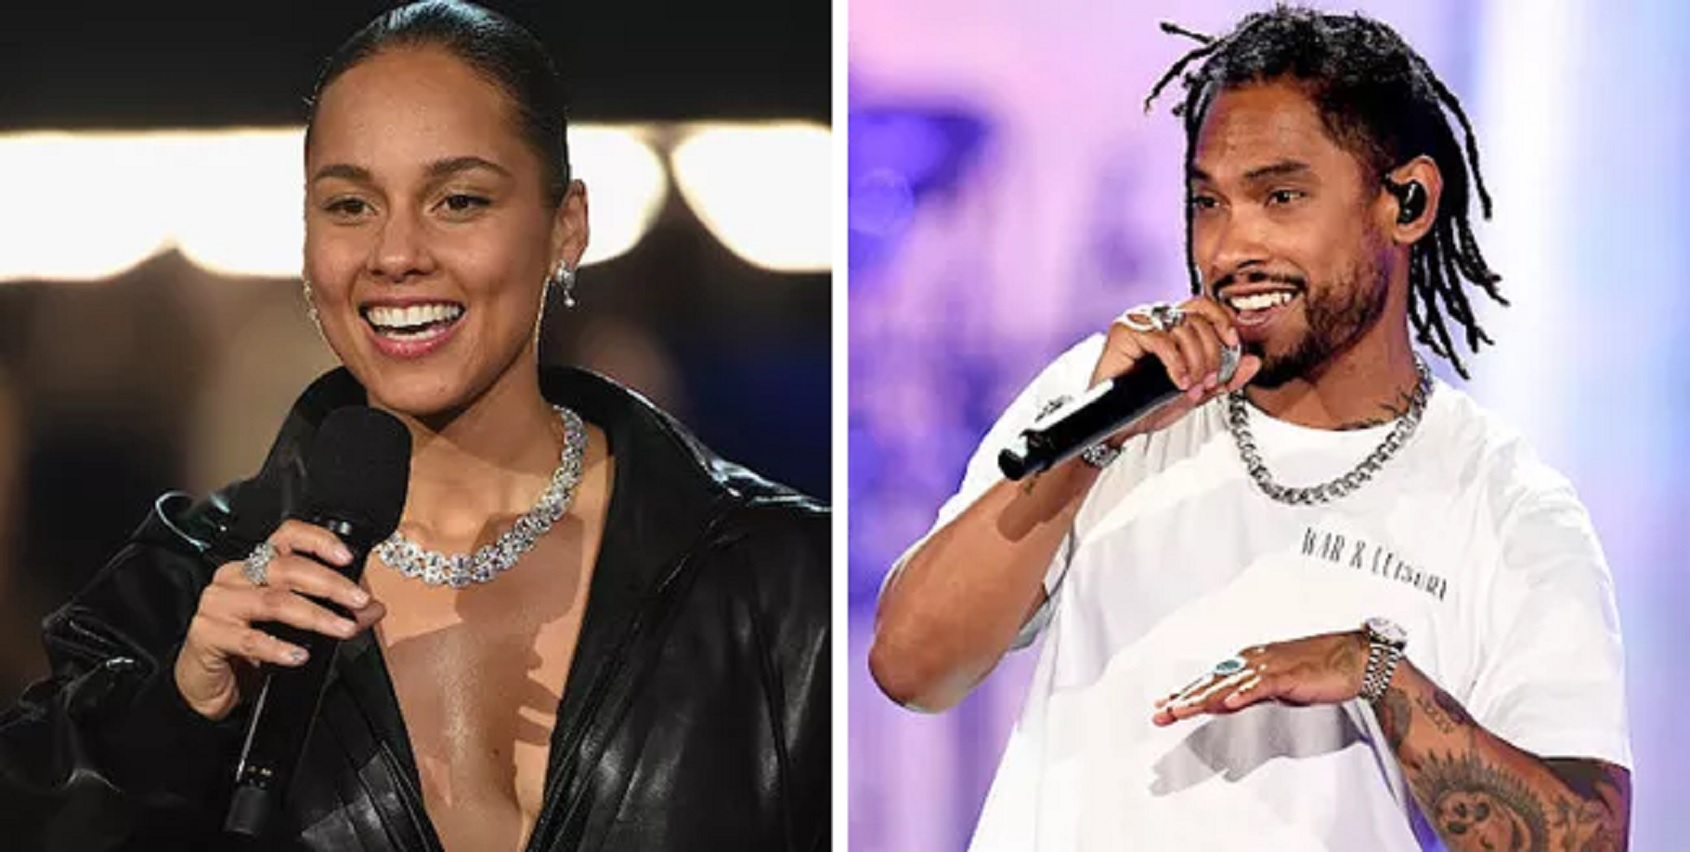 Listen To Alicia Keys’ New Song ‘Show Me Love’ With Miguel (Remix Version Feat 21 Savage)